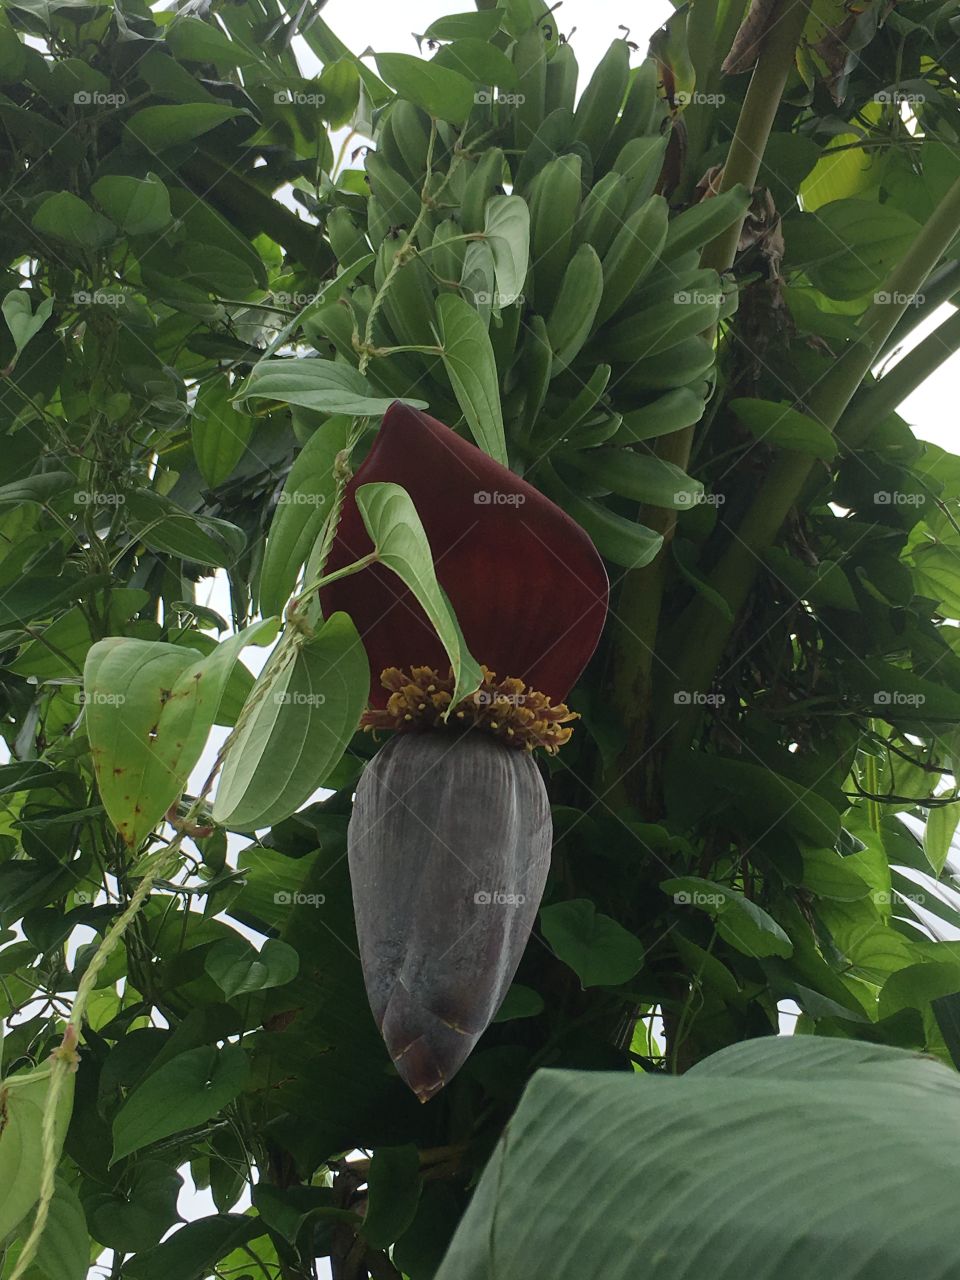 Baby bananas green and growing on a tree 